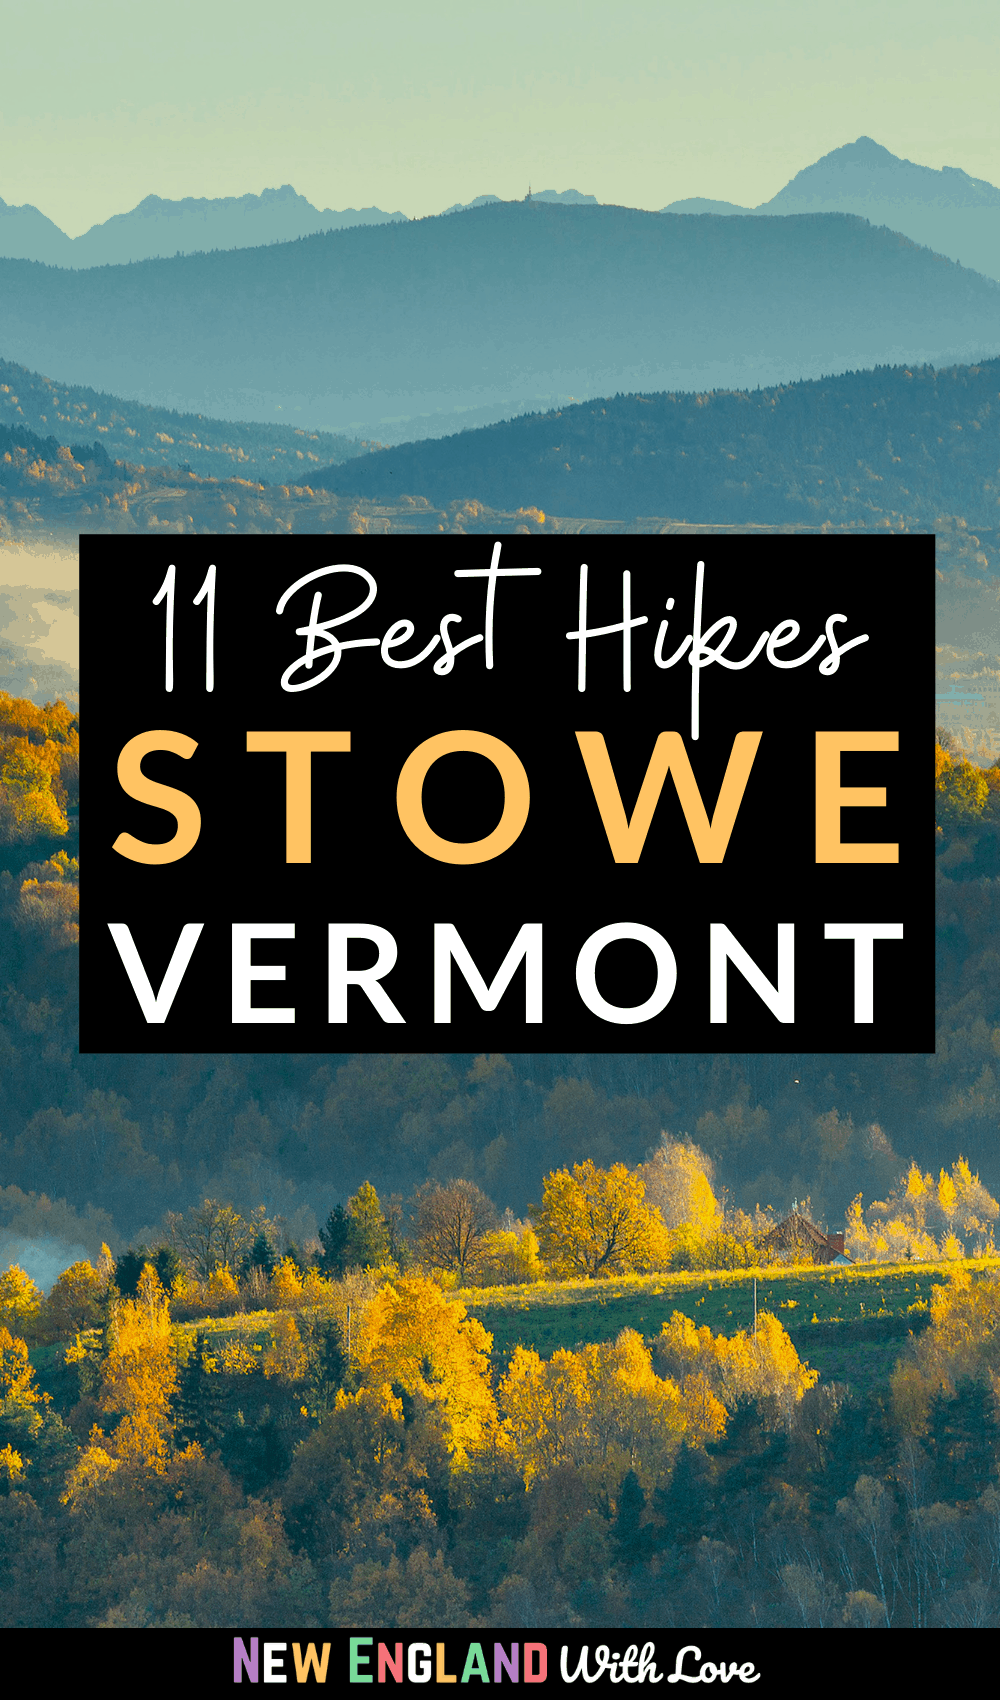 Pinterest graphic reading "11 Best Hikes in Stowe Vermont"